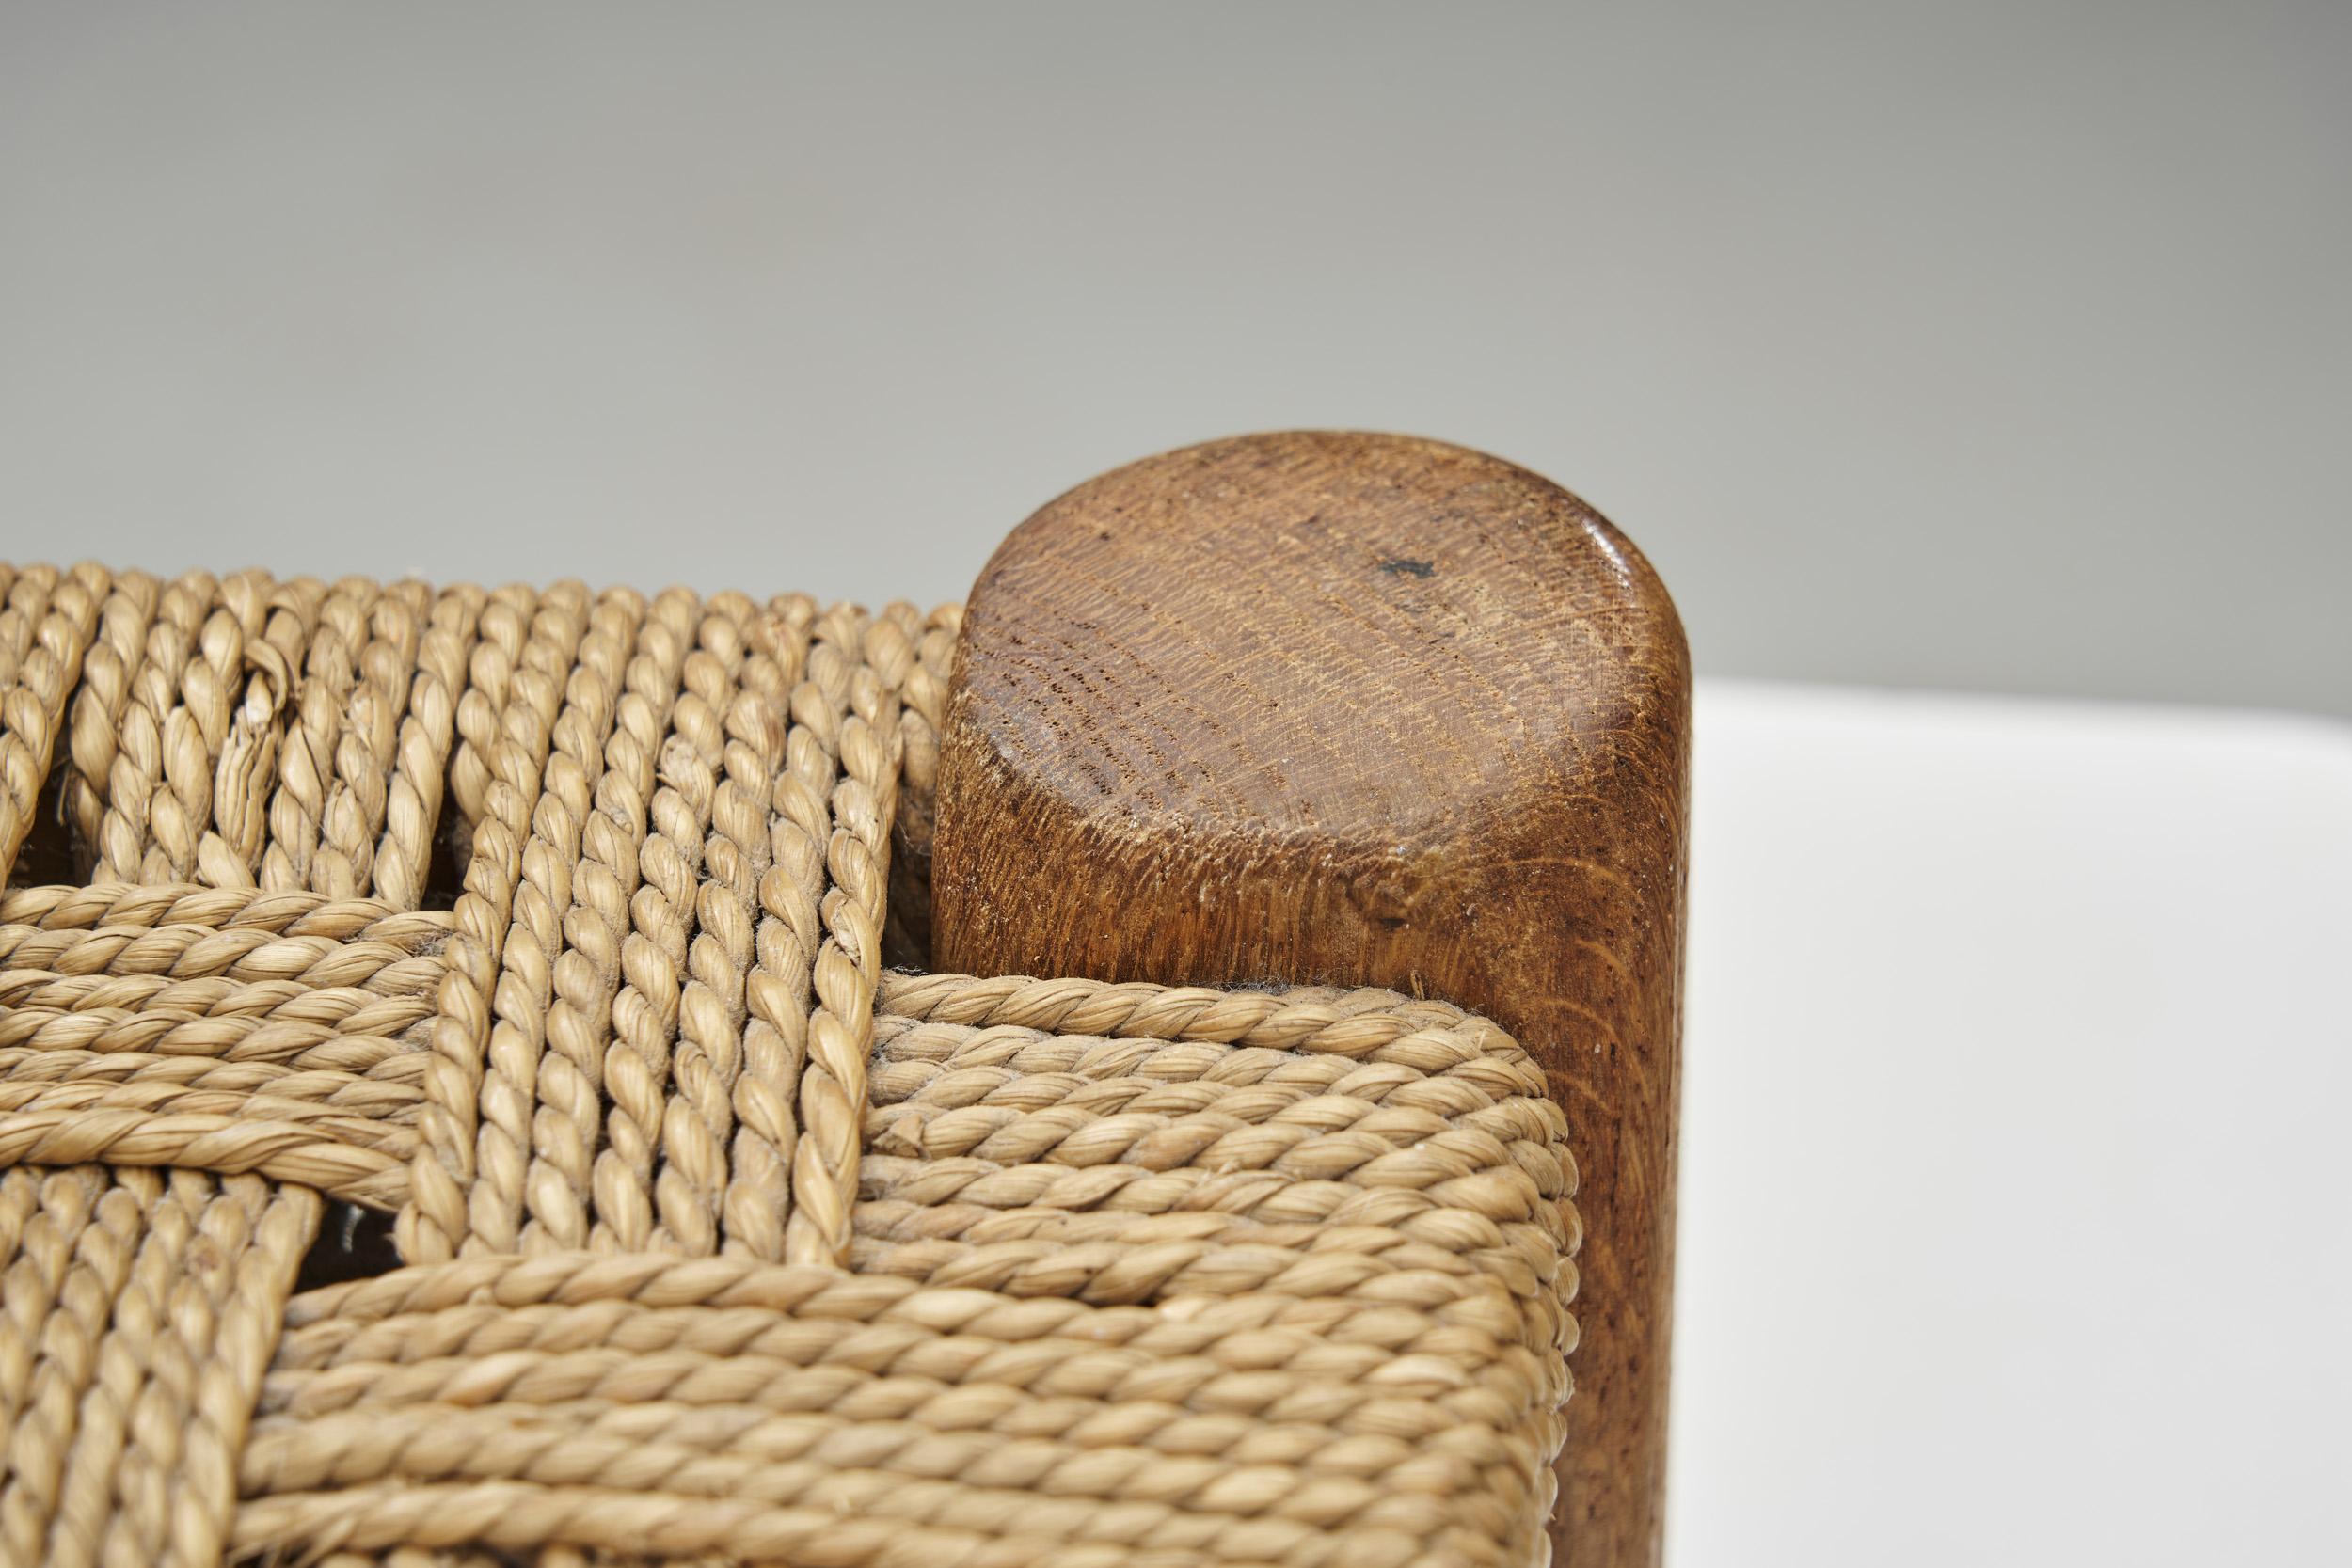 Woven Rush and Wood Stool, Europe ca 1950s For Sale 2